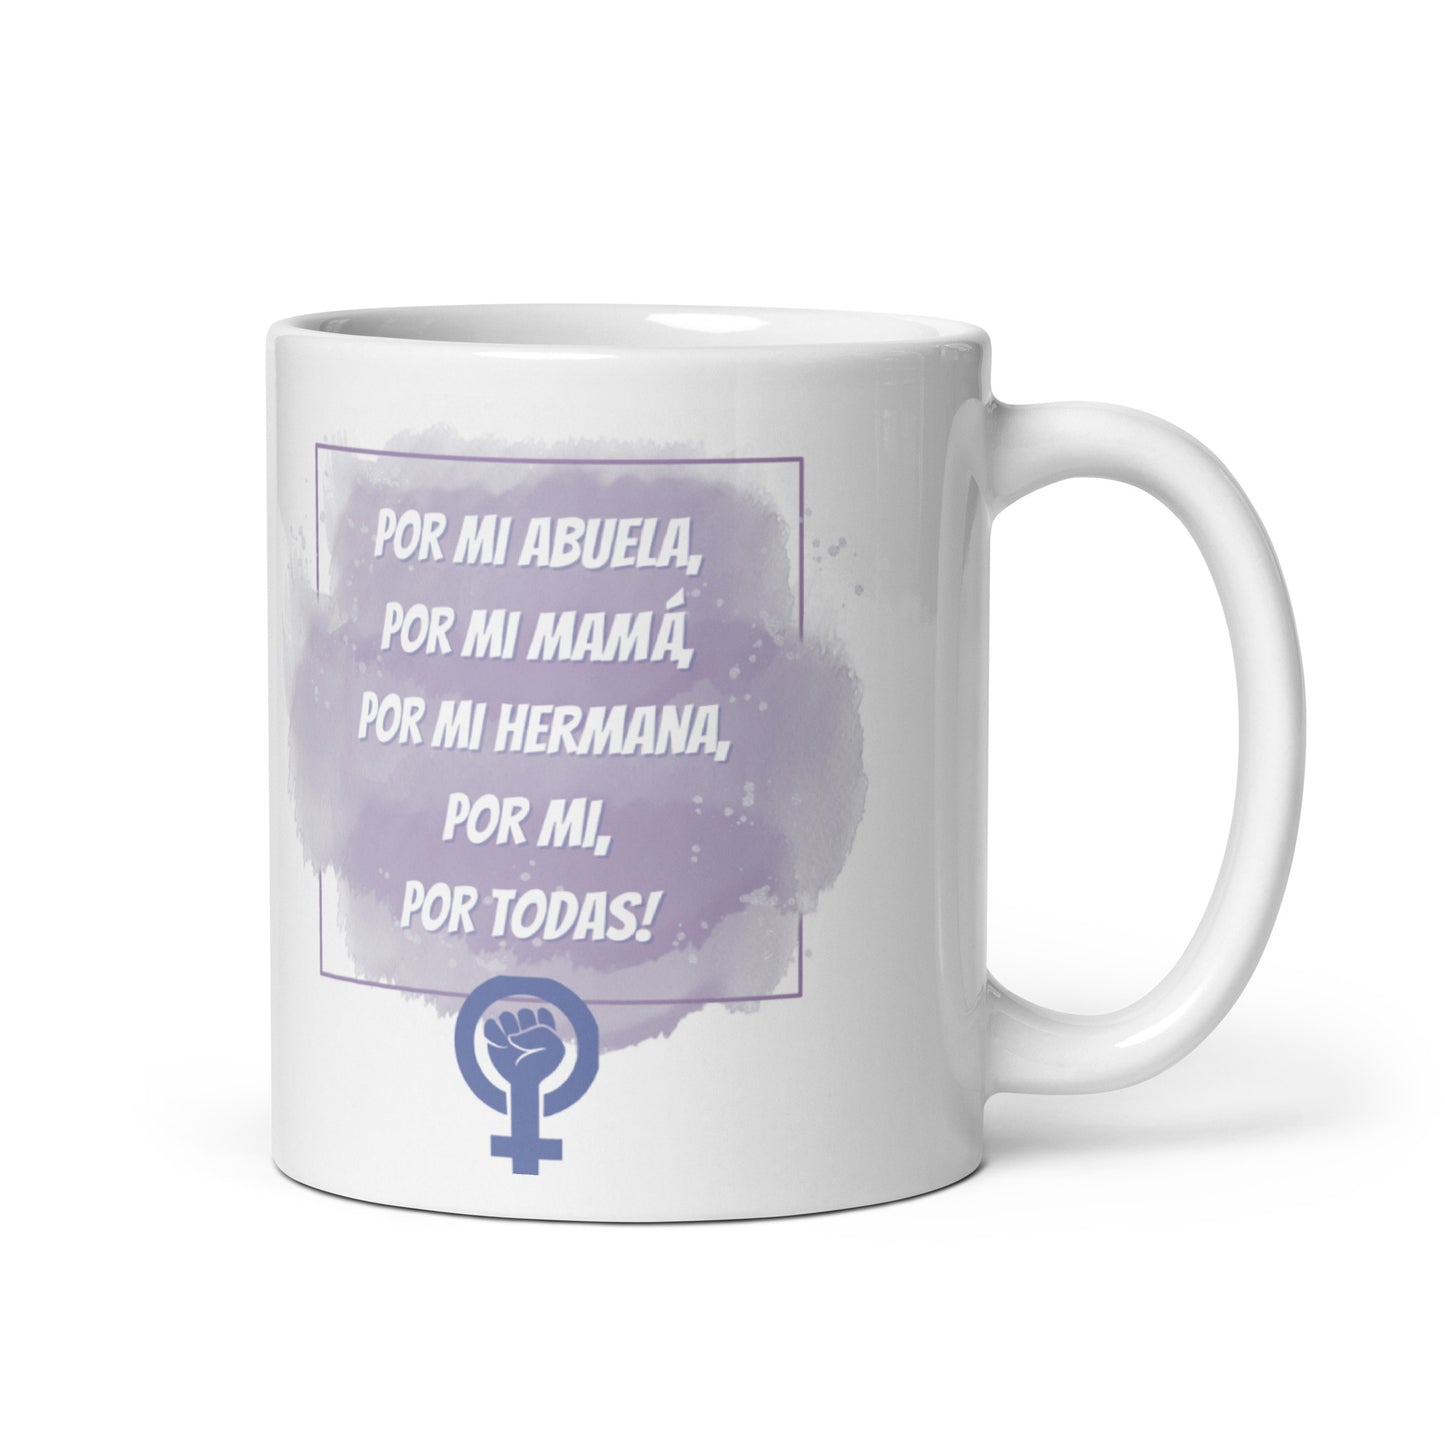 For my grandmother, for my mom, for my sister, for me, for everyone! Cup